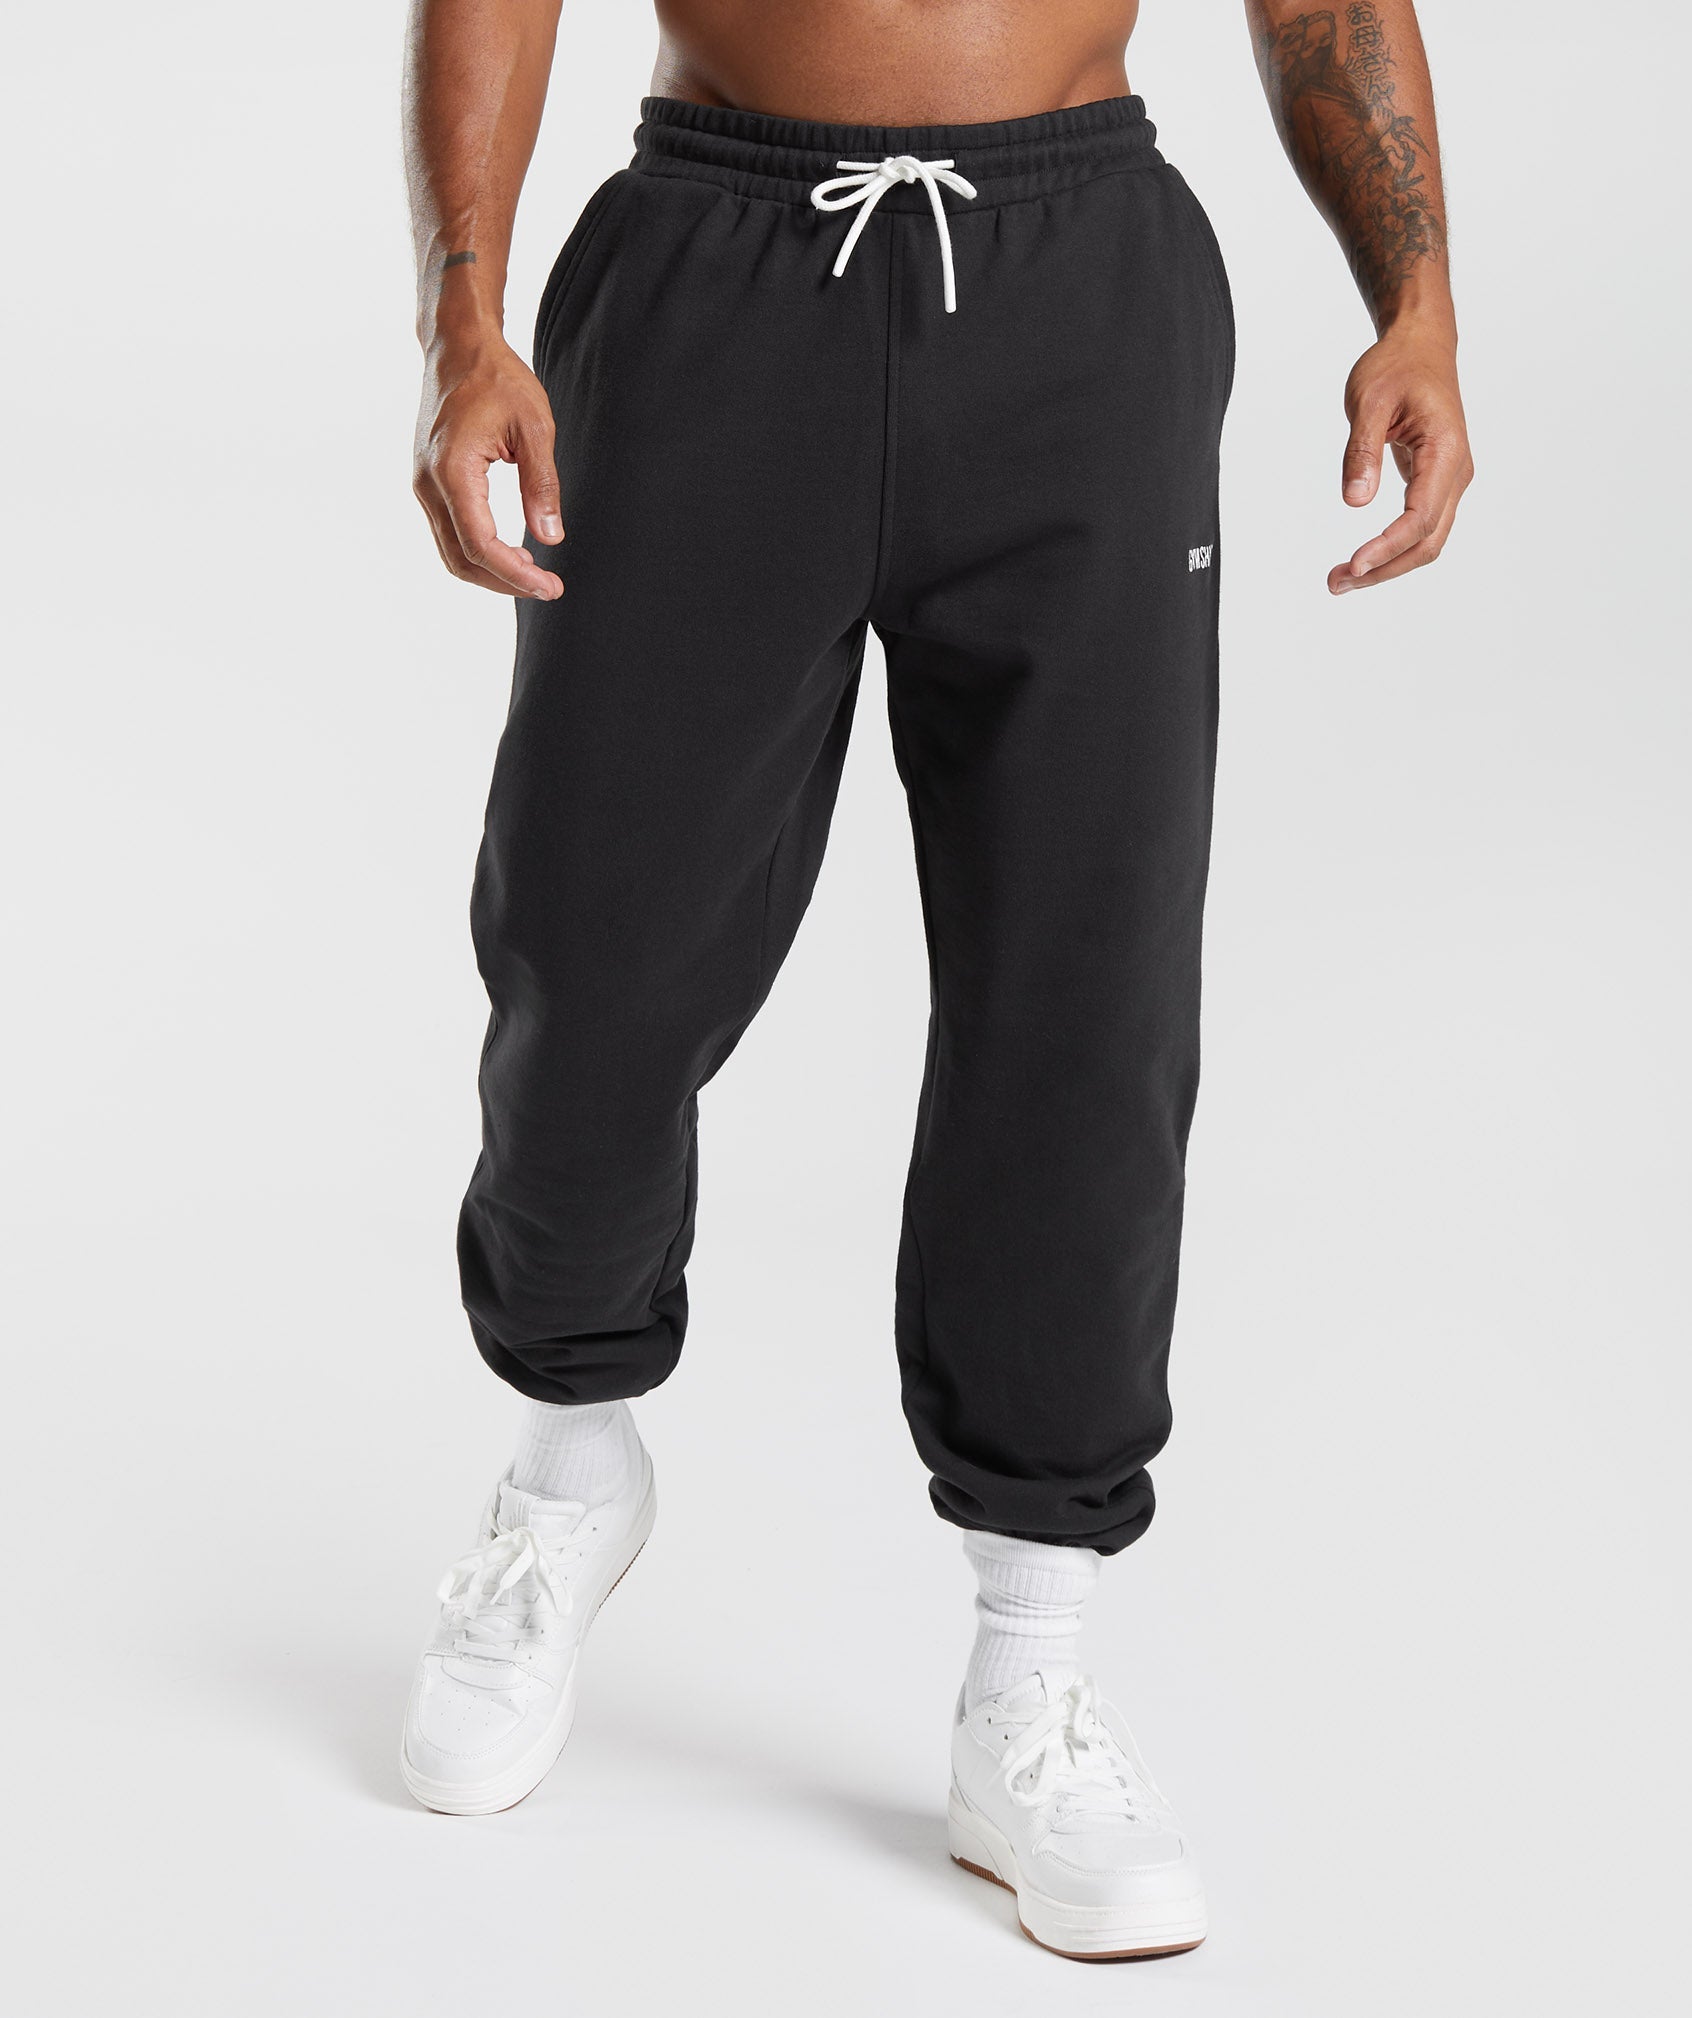 Rest Day Sweats Joggers in Black - view 1